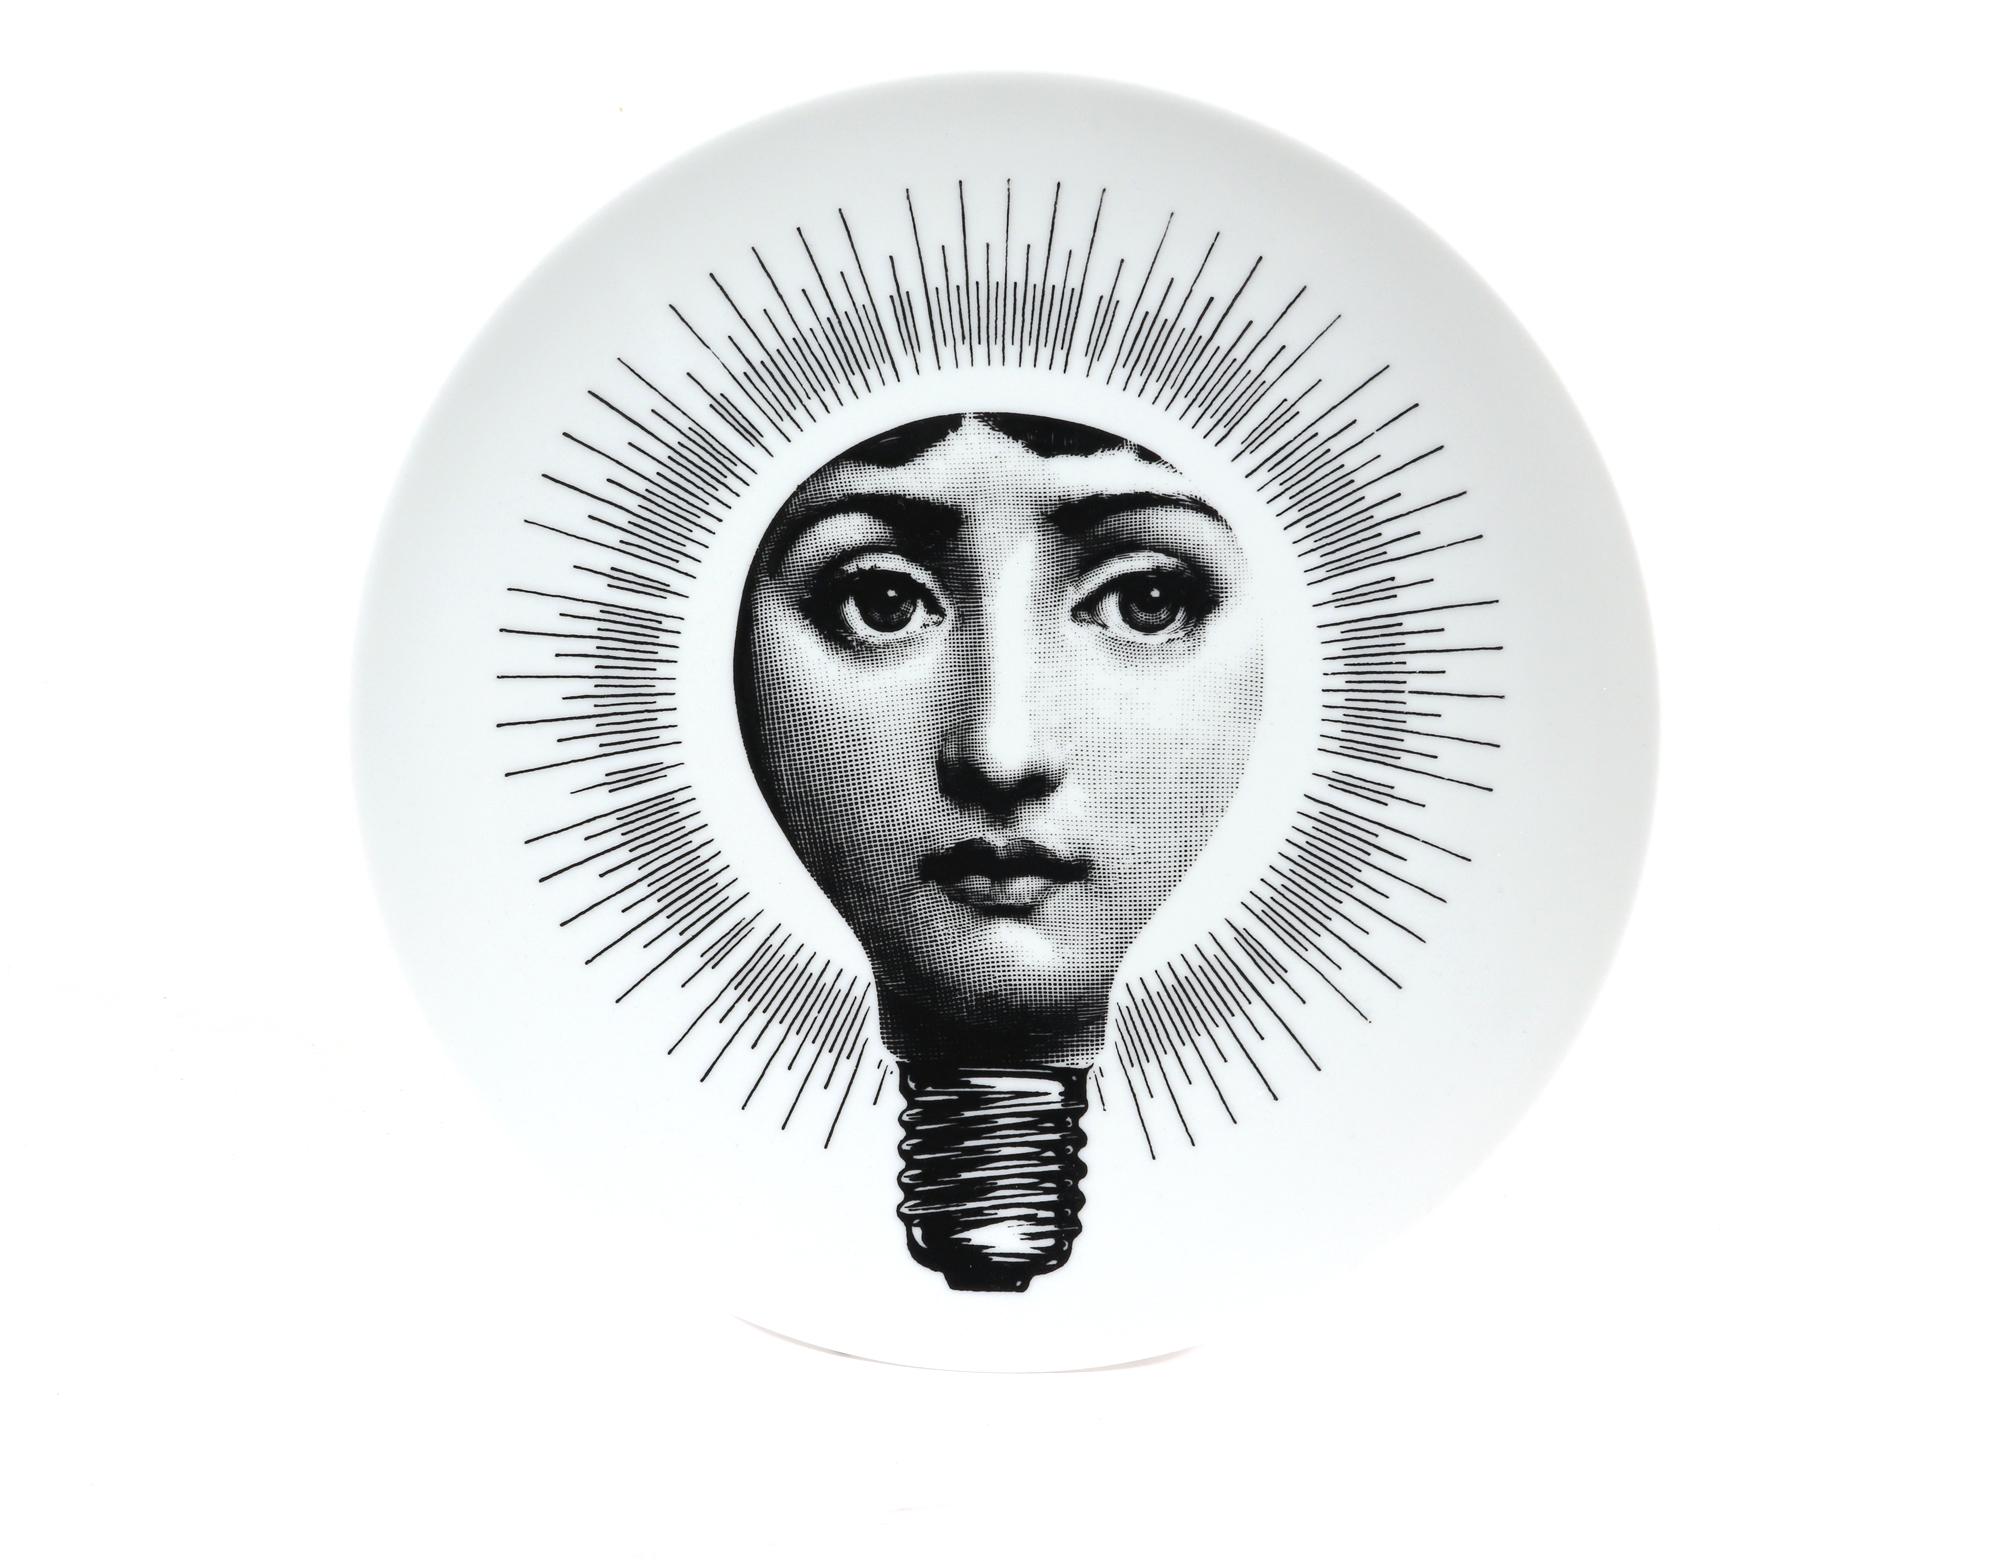 Fornasetti Porcelain Surrealist Themes & Variation Plate #83,
The Light Bulb,
Atelier Fornasetti

The Surreal Fornasetti porcelain plate in the Themes & Variation pattern depicts the face of Lina Cavalieri, Piero Fornasetti's muse in a light